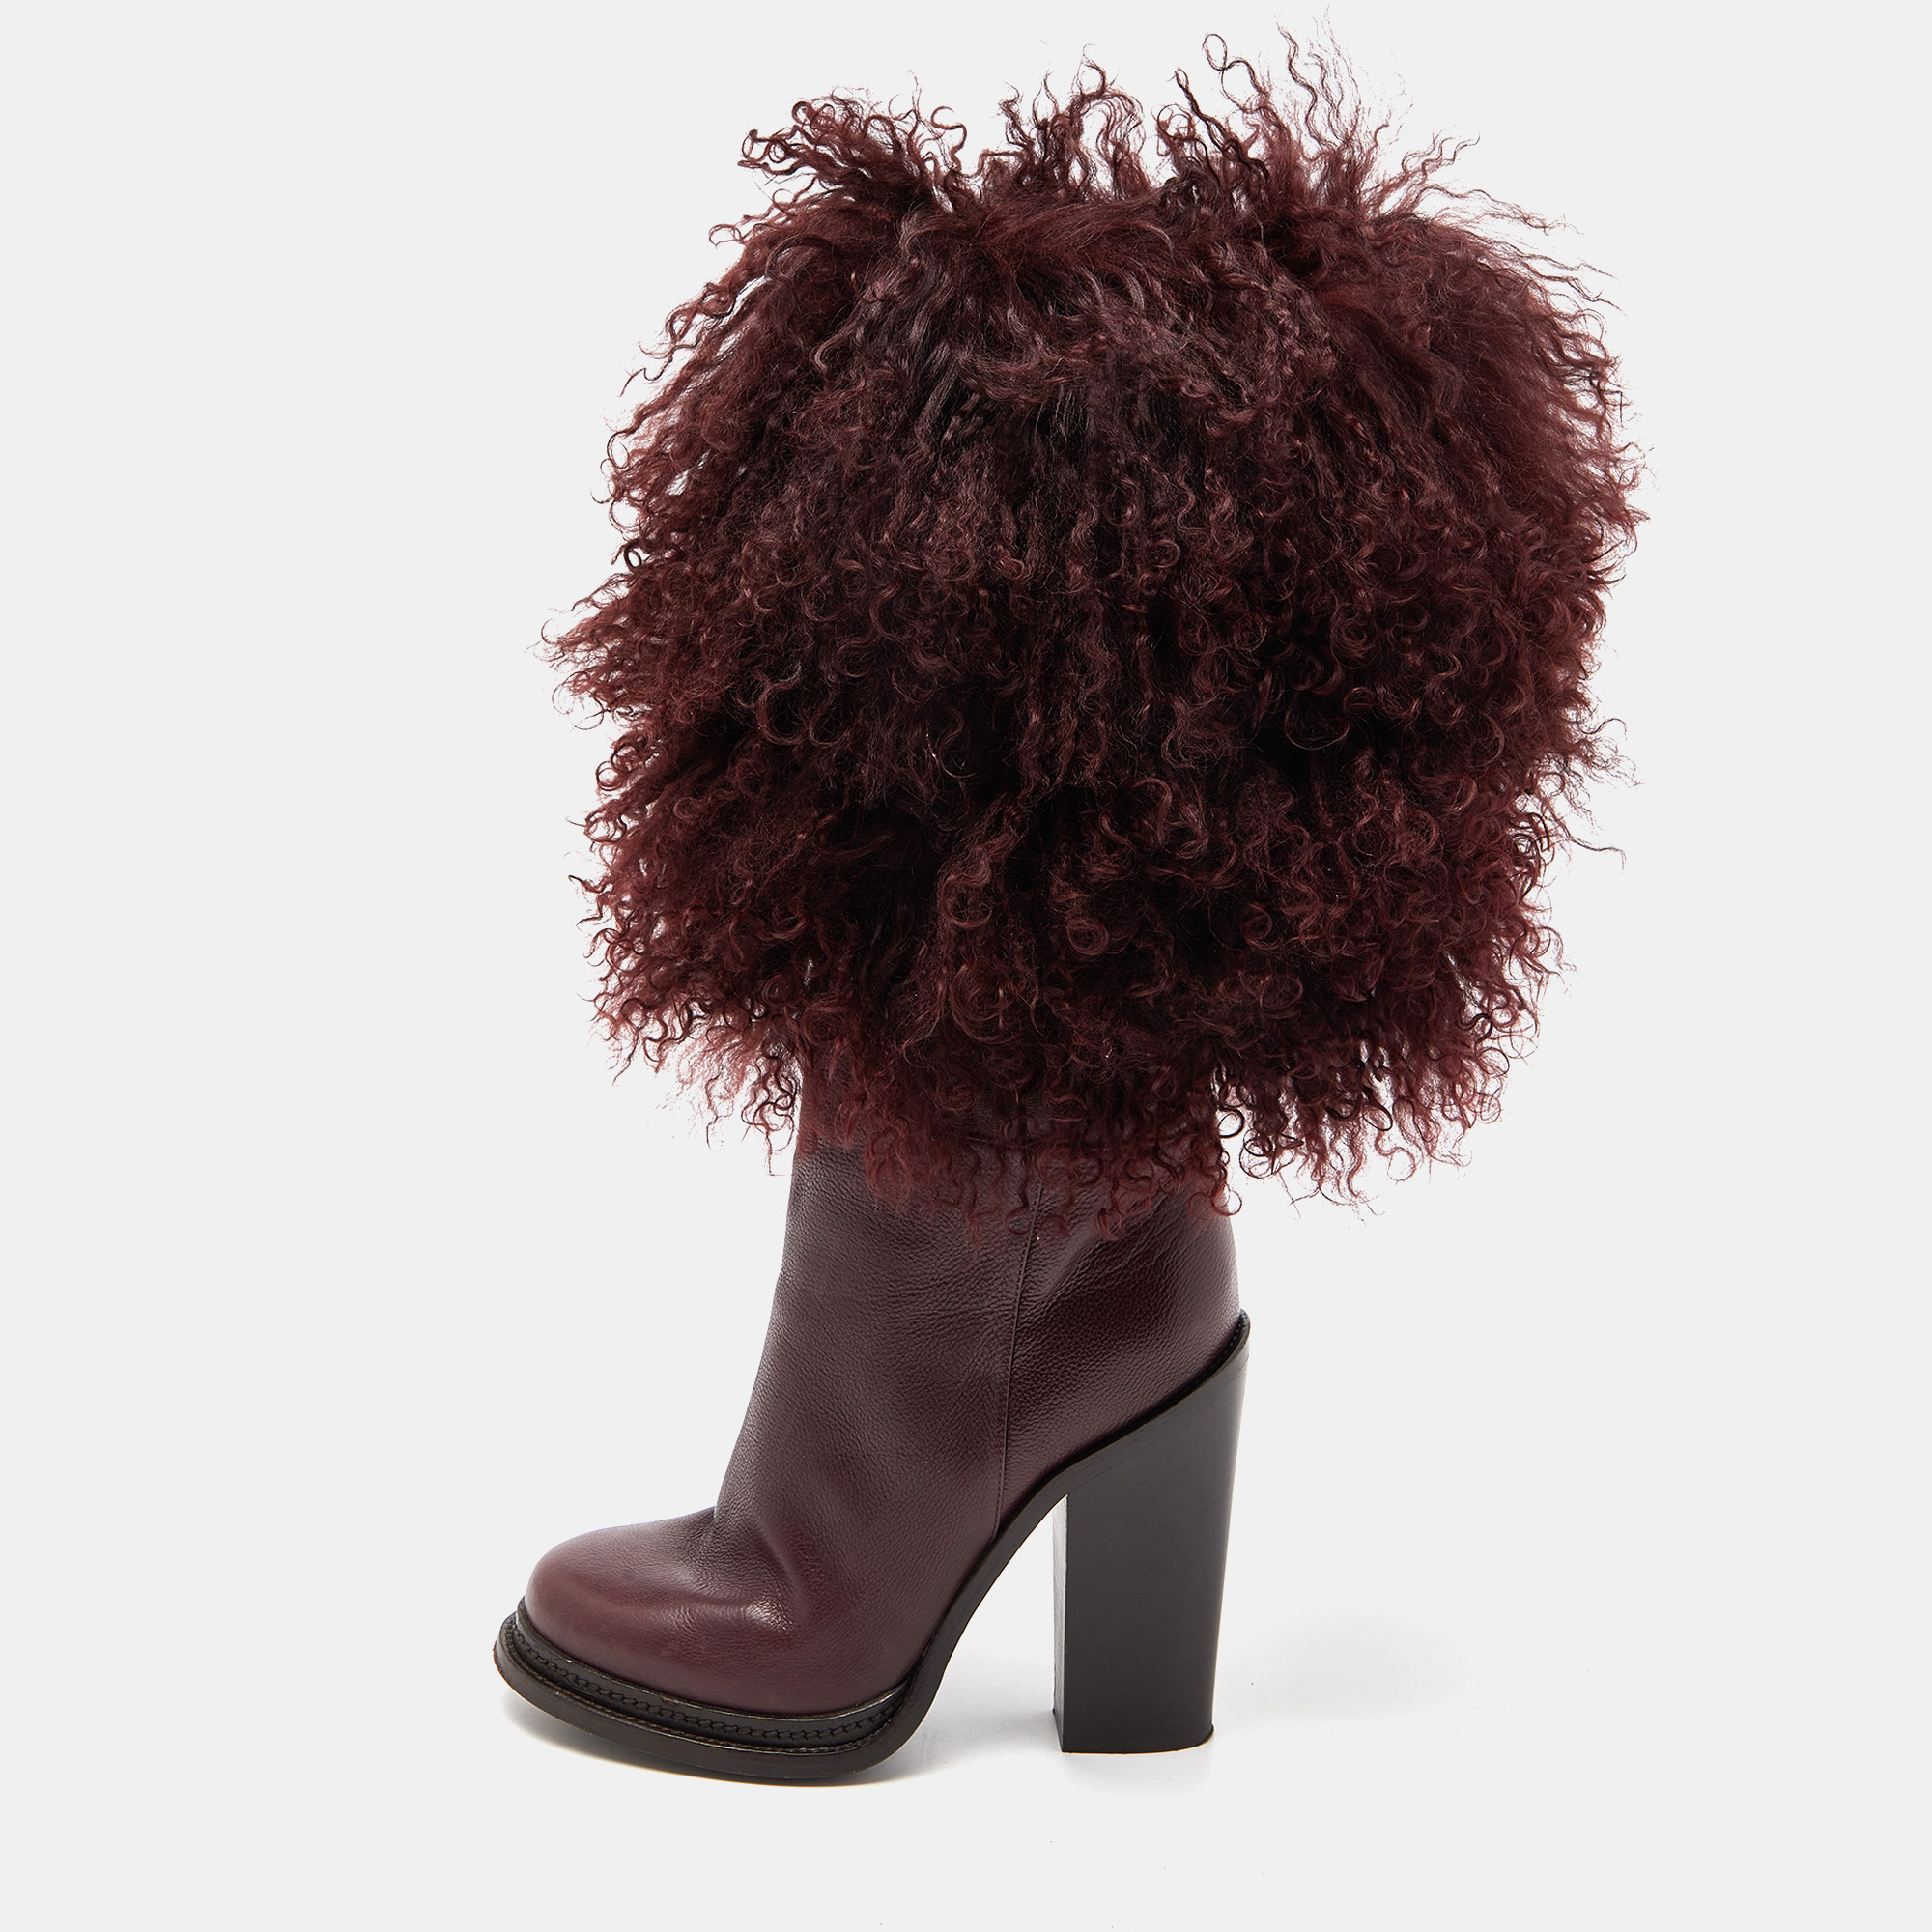 Pre-owned Dolce & Gabbana Burgundy Fur And Leather Calf Length Boots Size 38